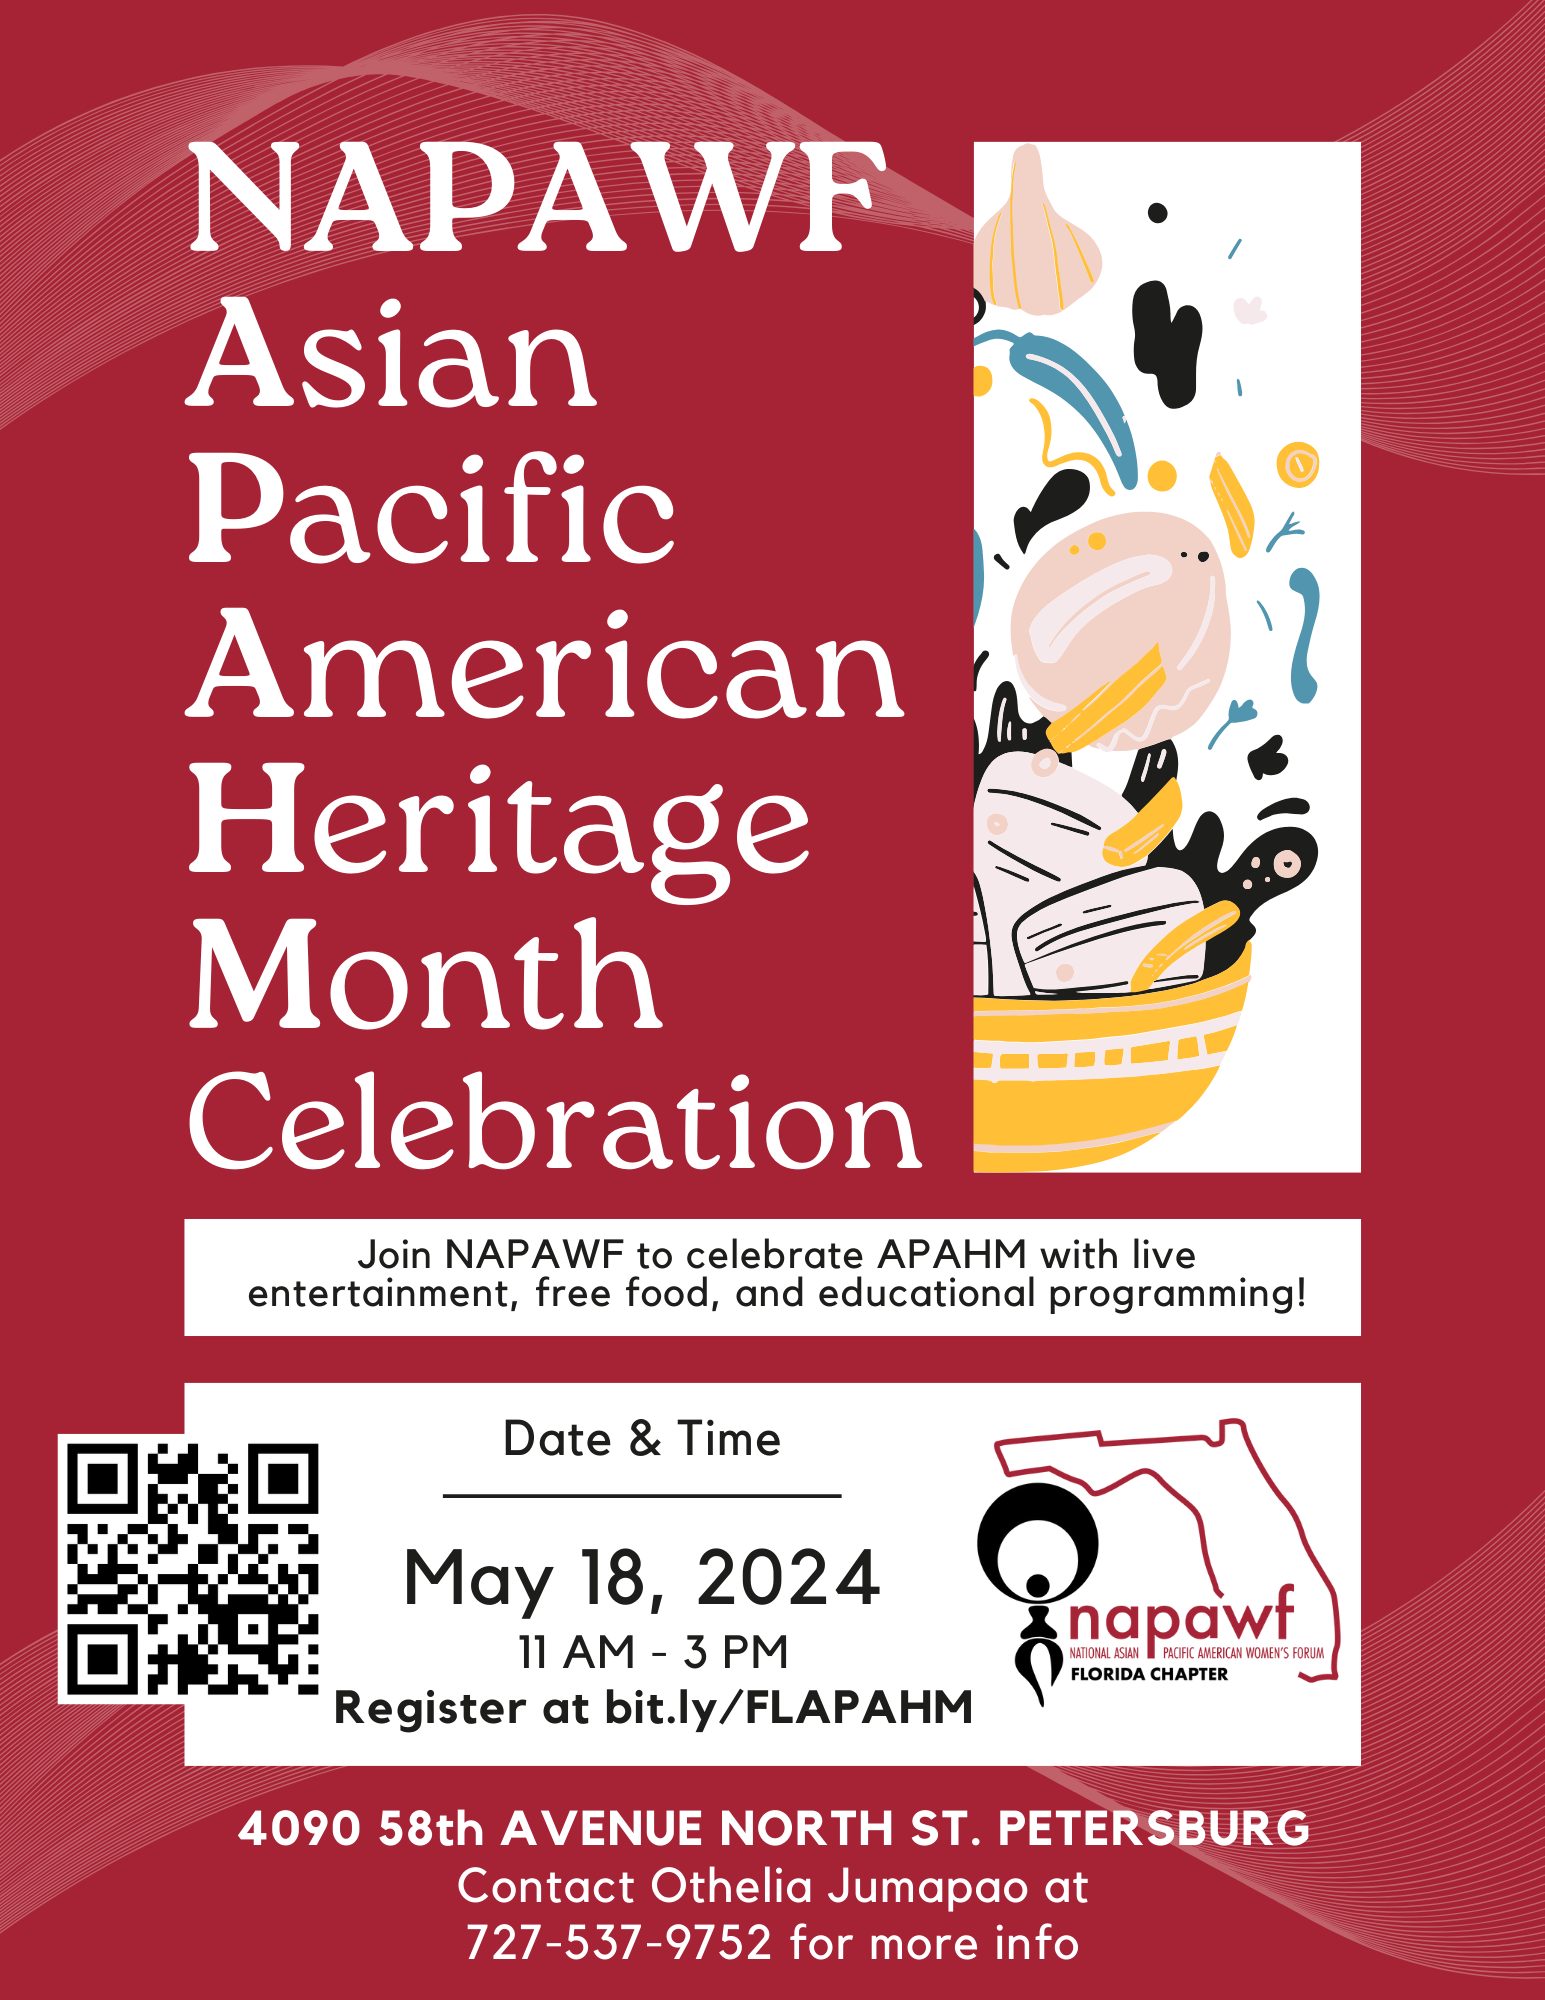 NAPAWF Asian Pacific American Heritage Month